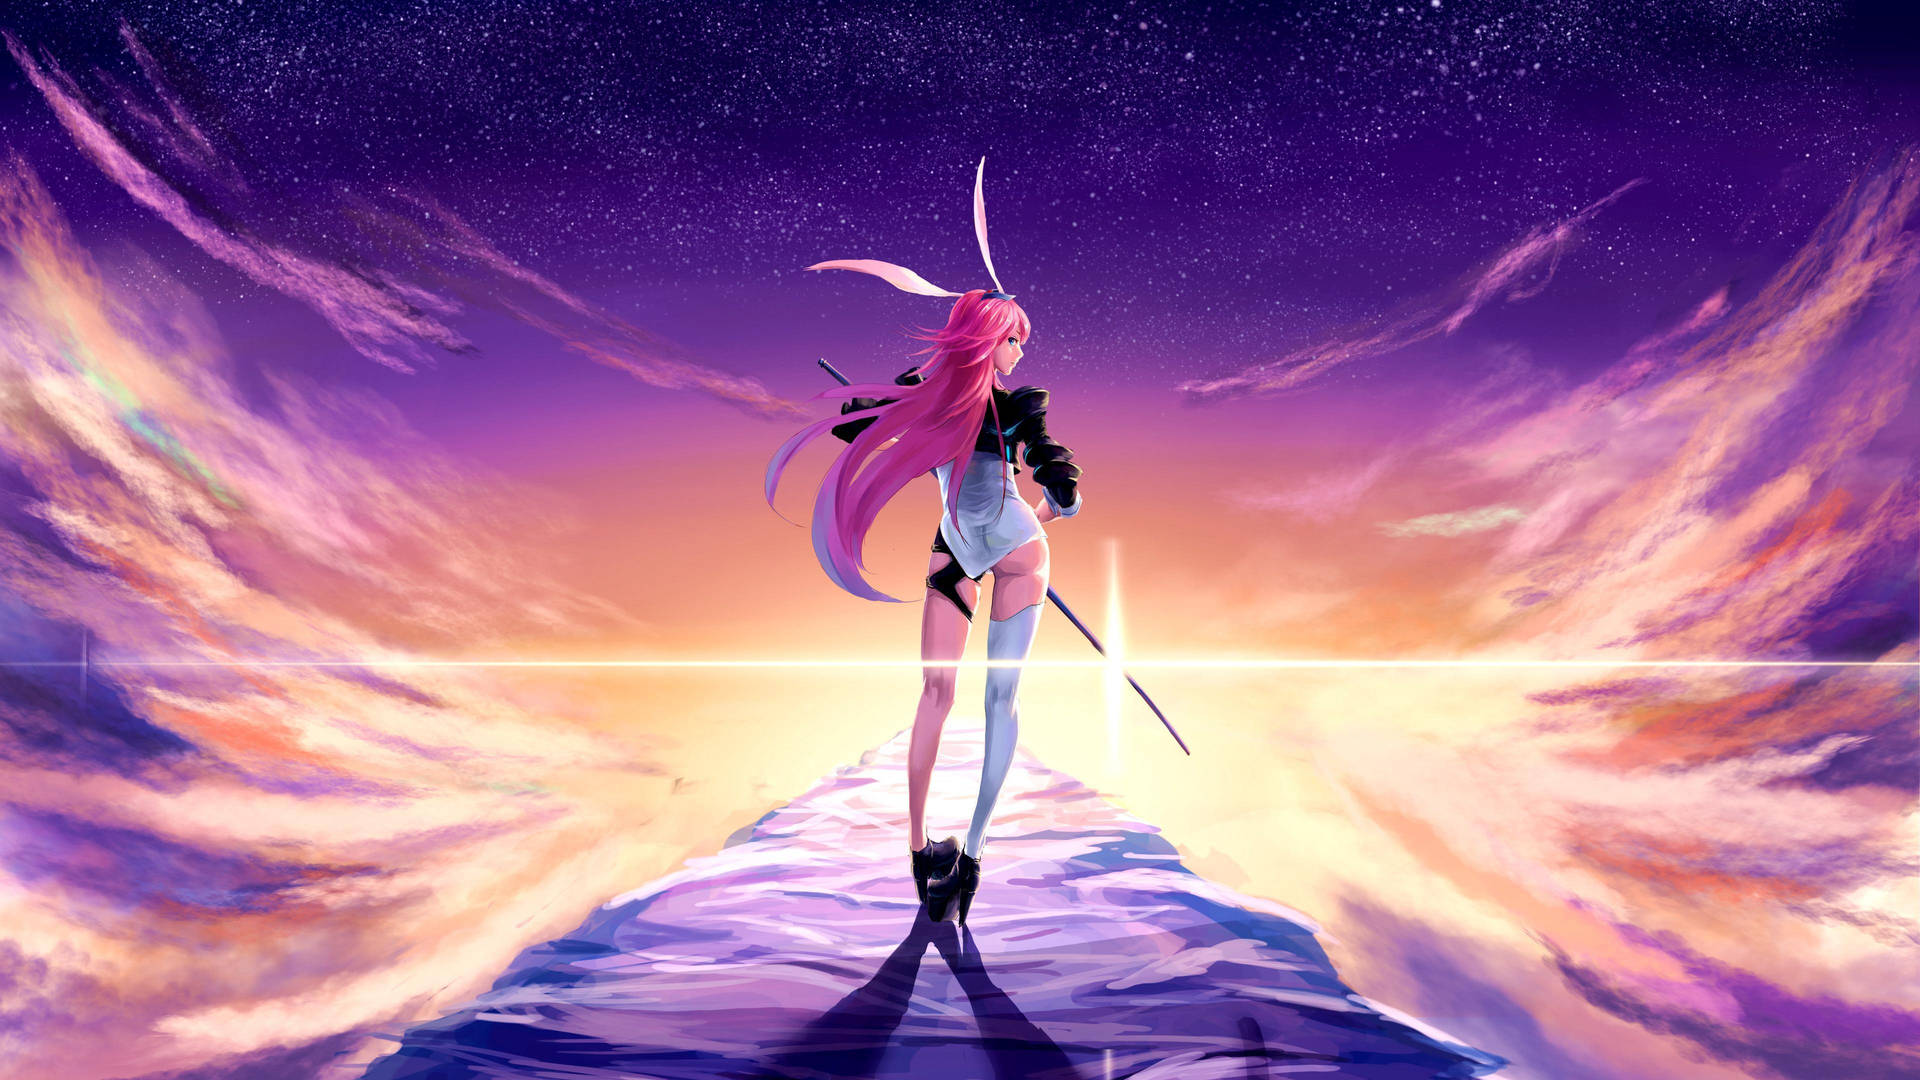 A stunning cute anime-style purpleish landscape in 4k resolution gif